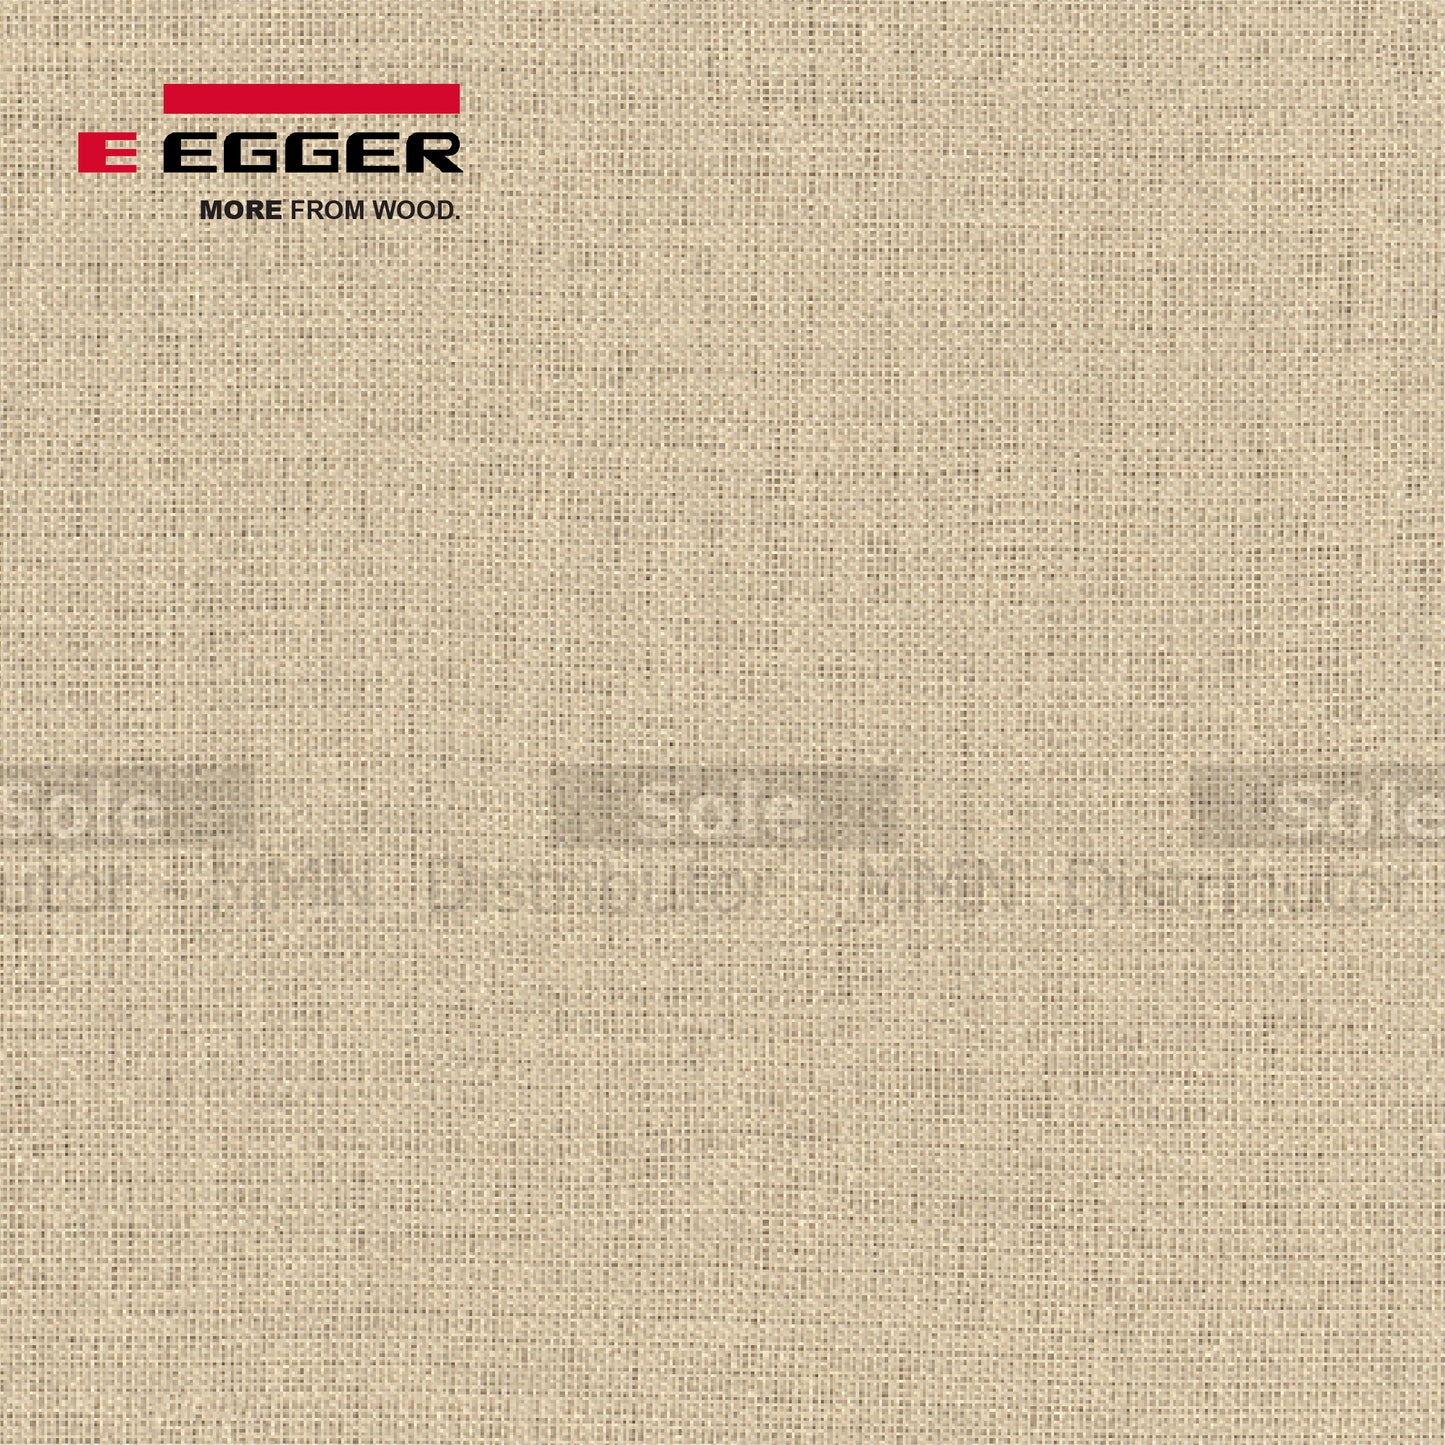 Egger Board Beige Textile, Thickness 18mm, Size 2800x2070mm - F416 - ST10